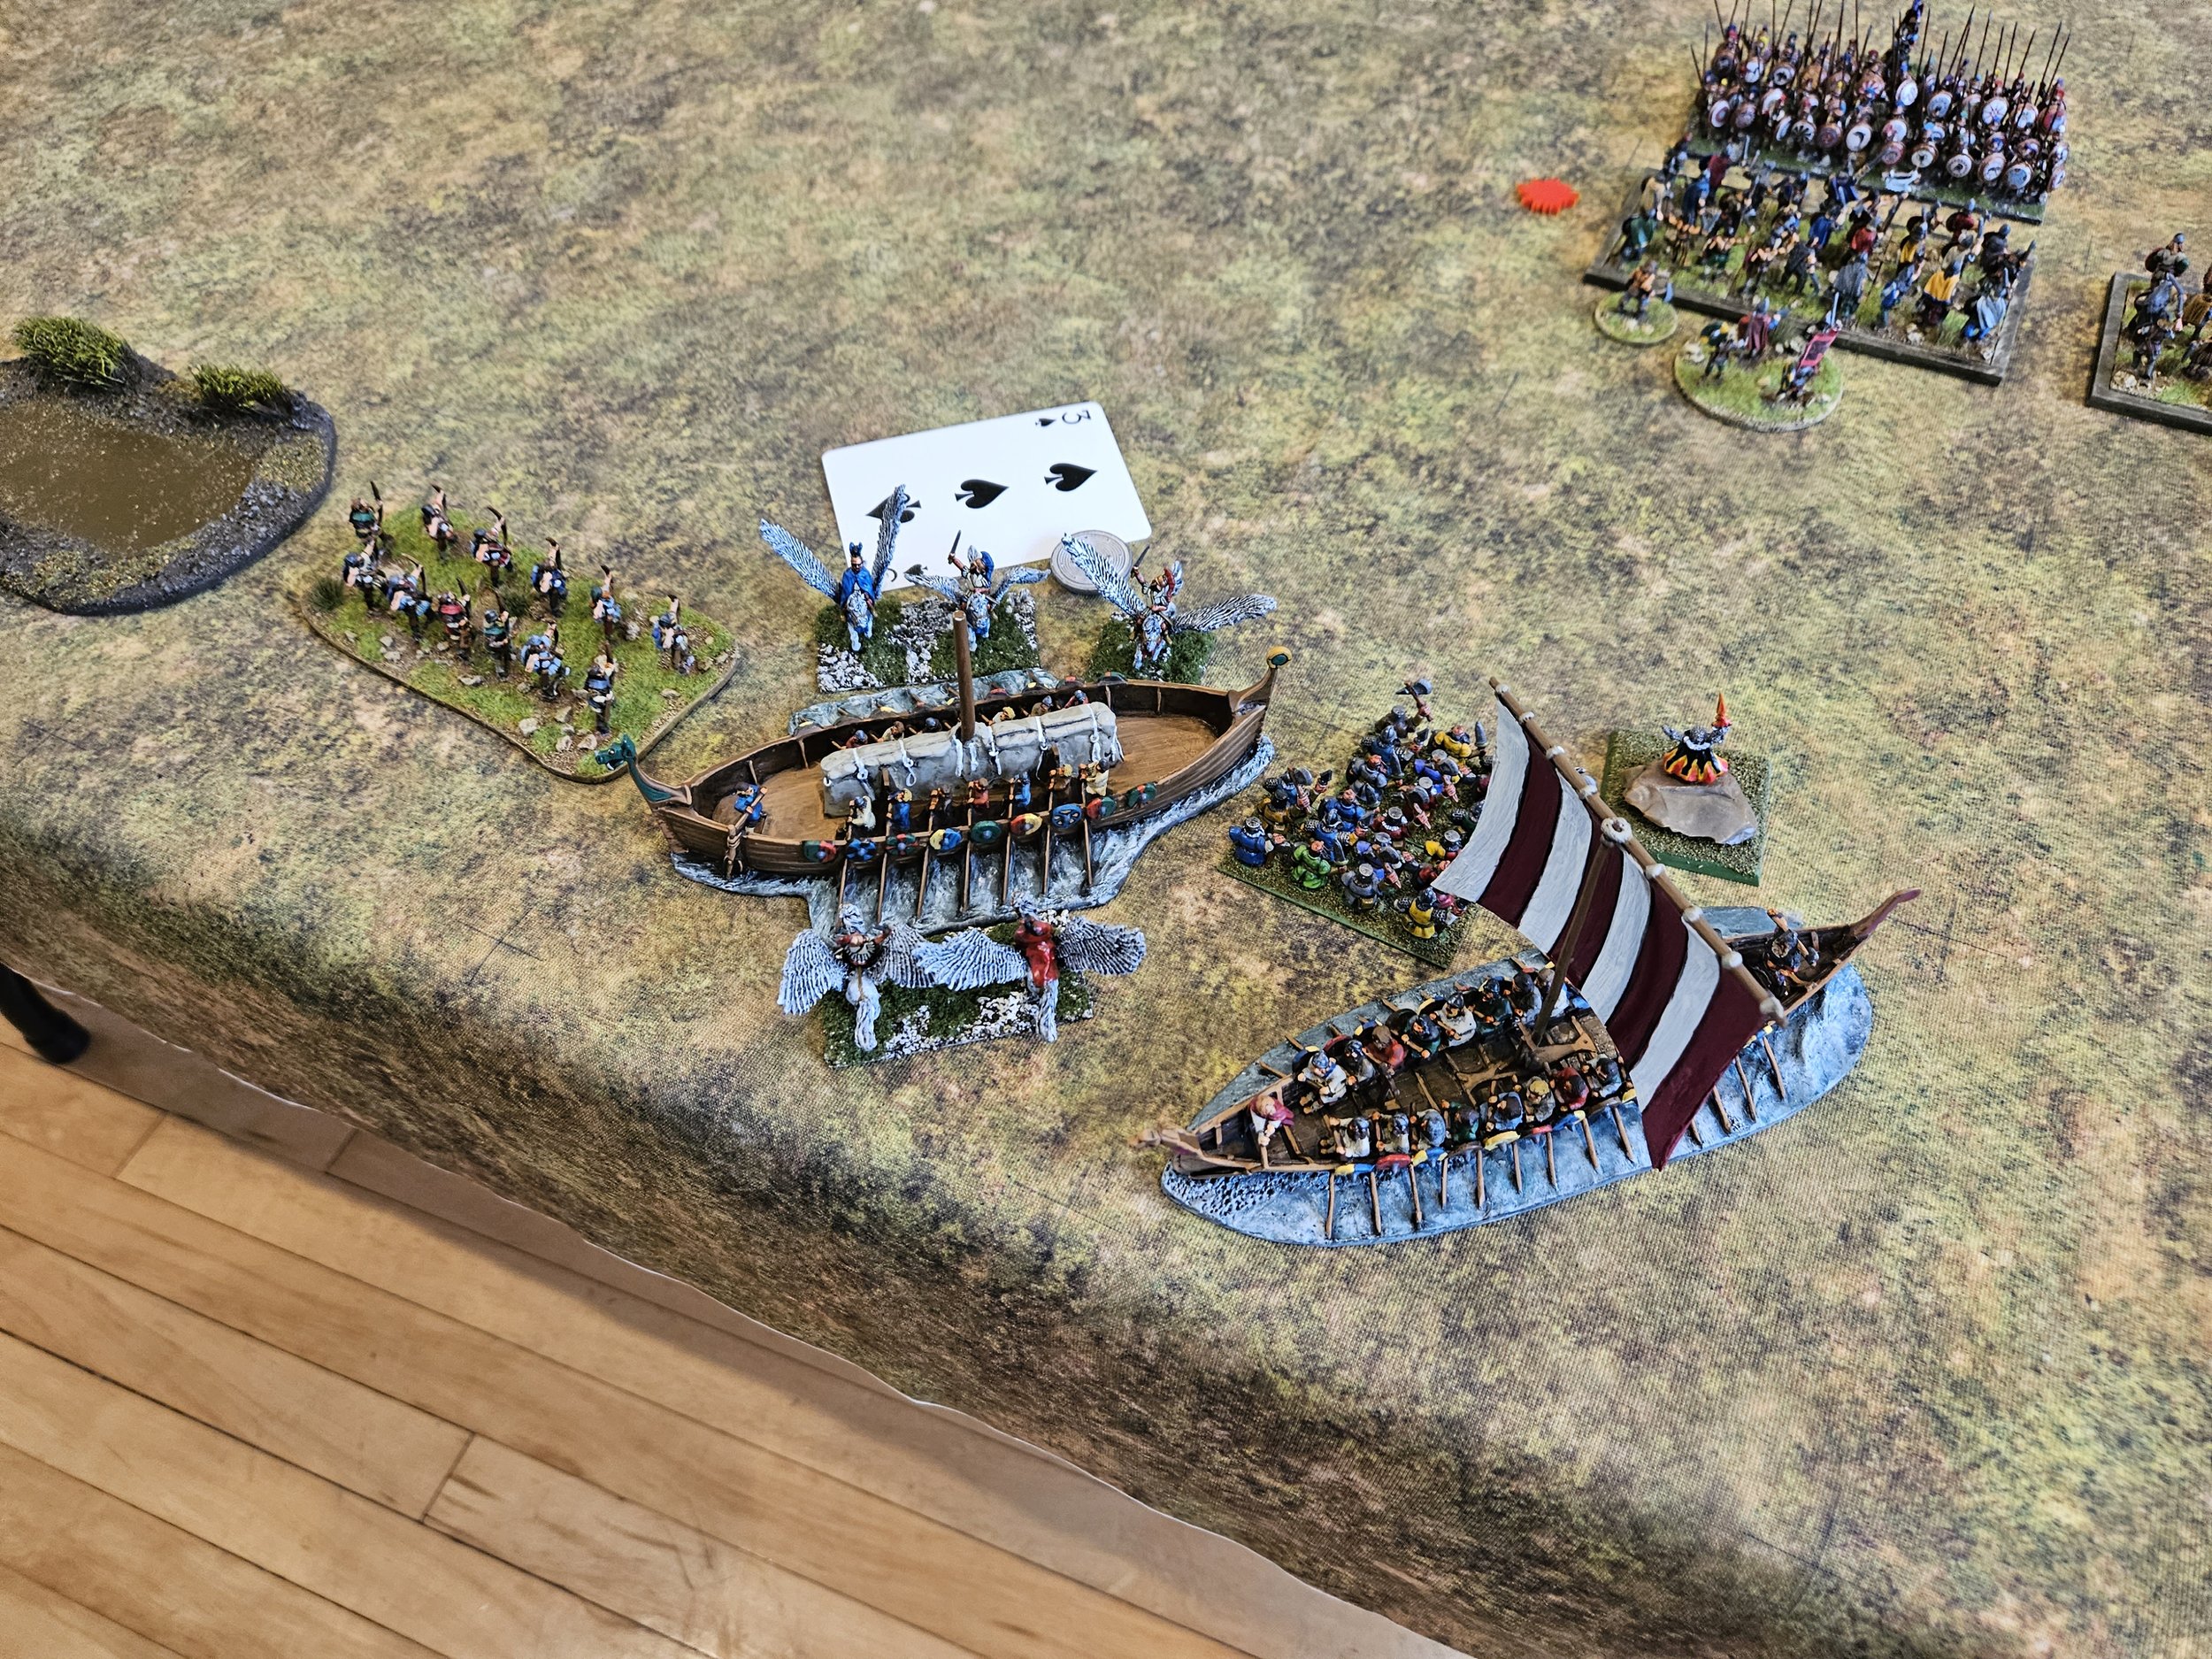  Having exchanged missile fire with the Norse lights, the Pegasus Cavalry perform another difficult activation to actually land in the Norse camp. They gain three coins, but can they keep them? 